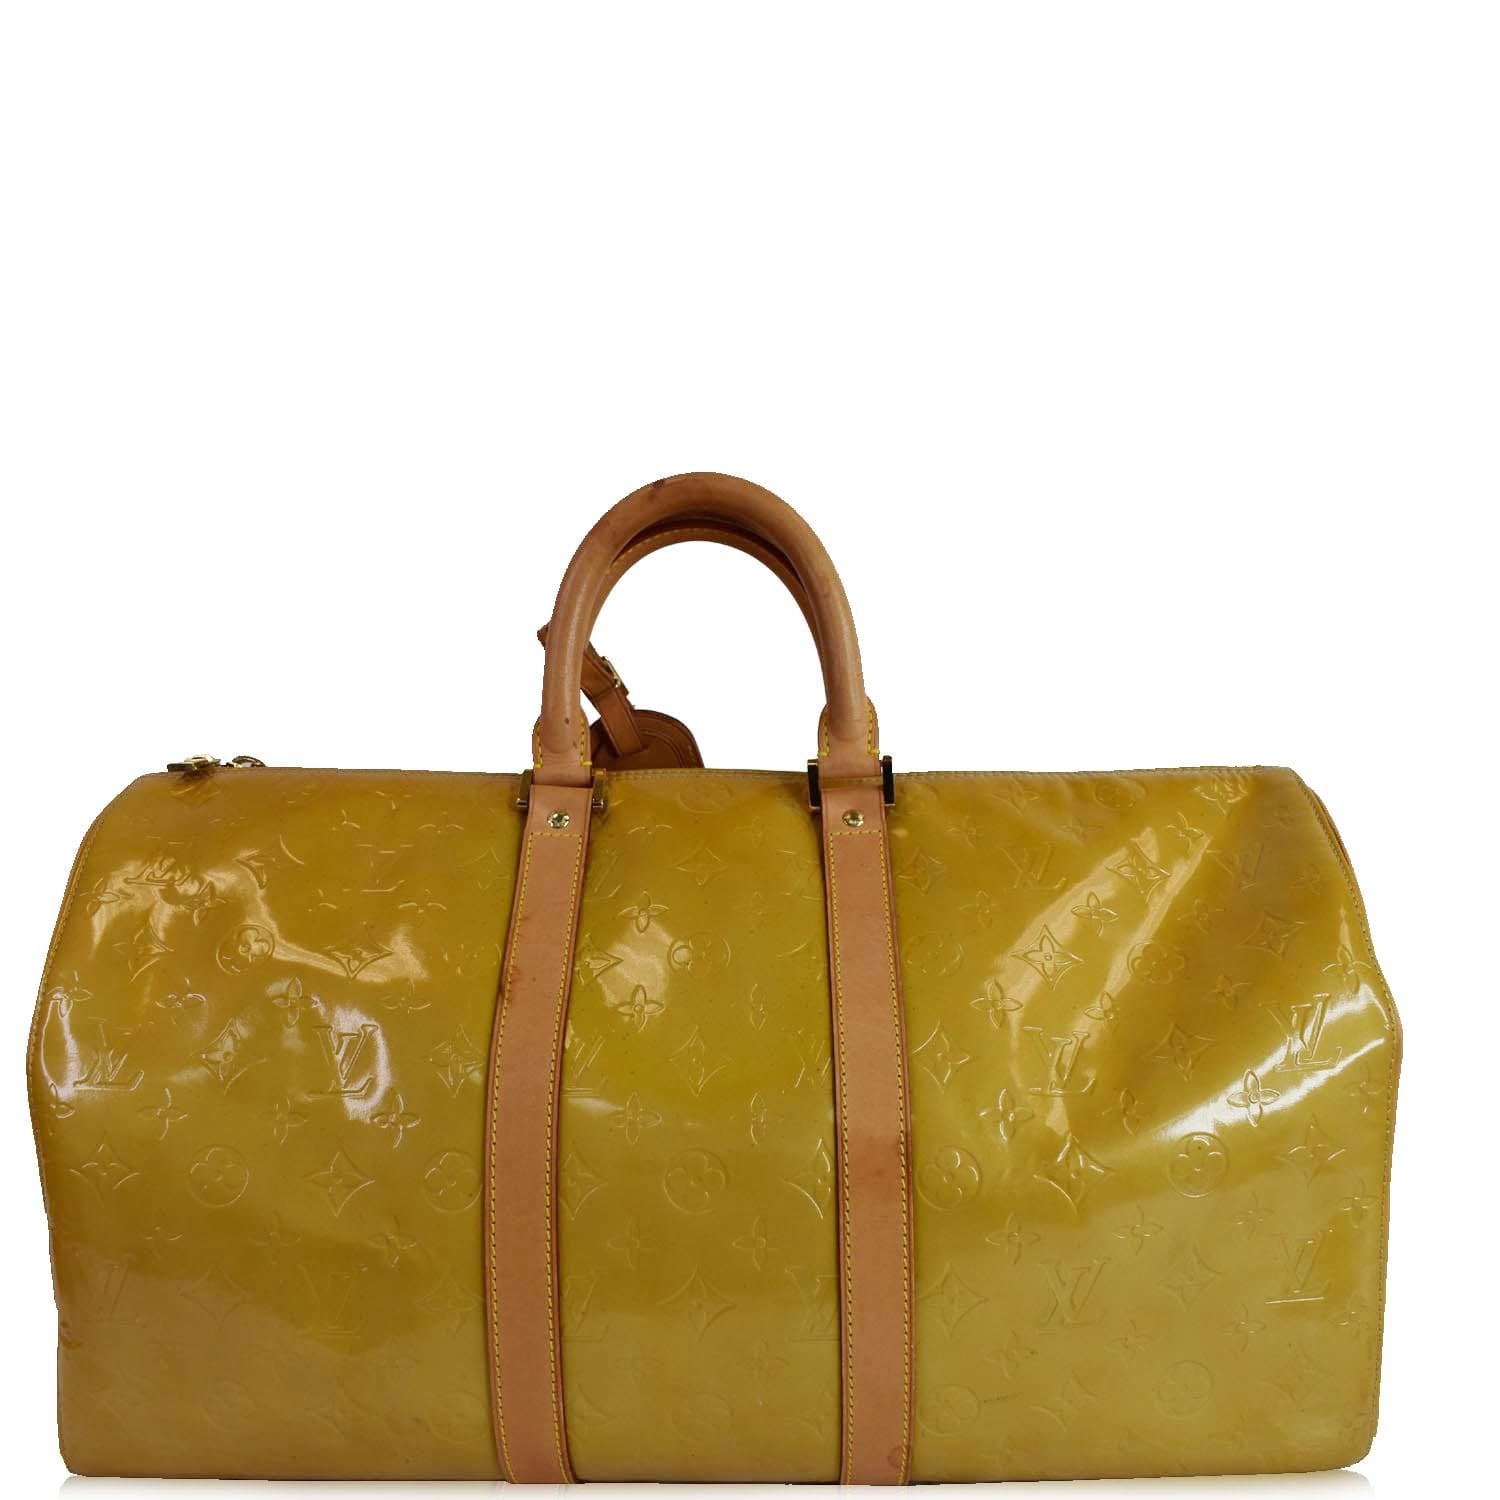 Pre-owned Louis Vuitton Pale Yellow Monogram Vernis Leather Good